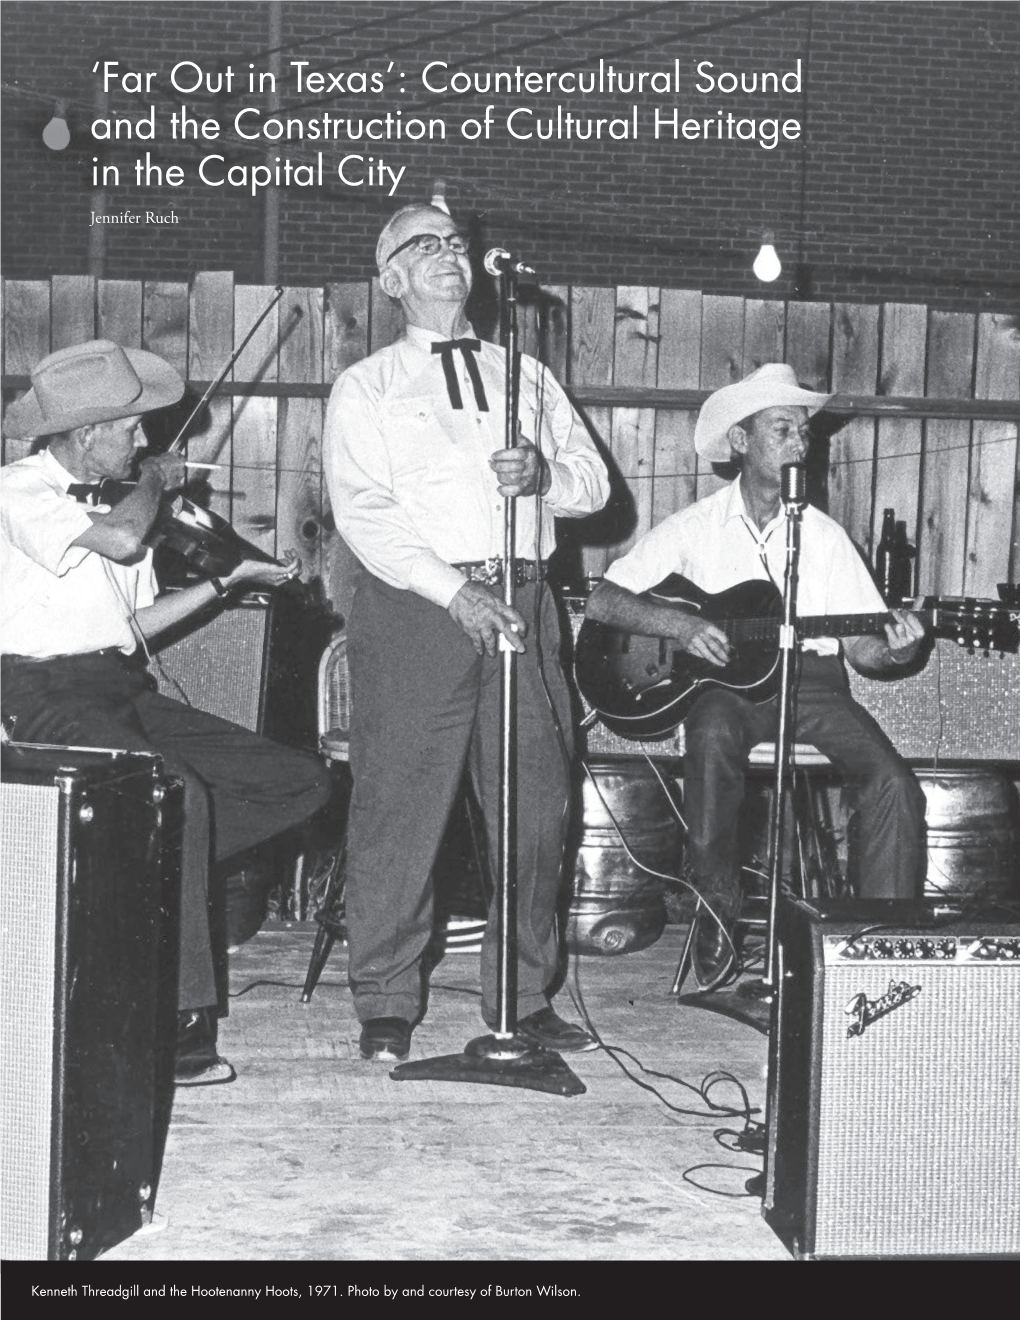 'Far out in Texas': Countercultural Sound and the Construction of Cultural Heritage in the Capital City